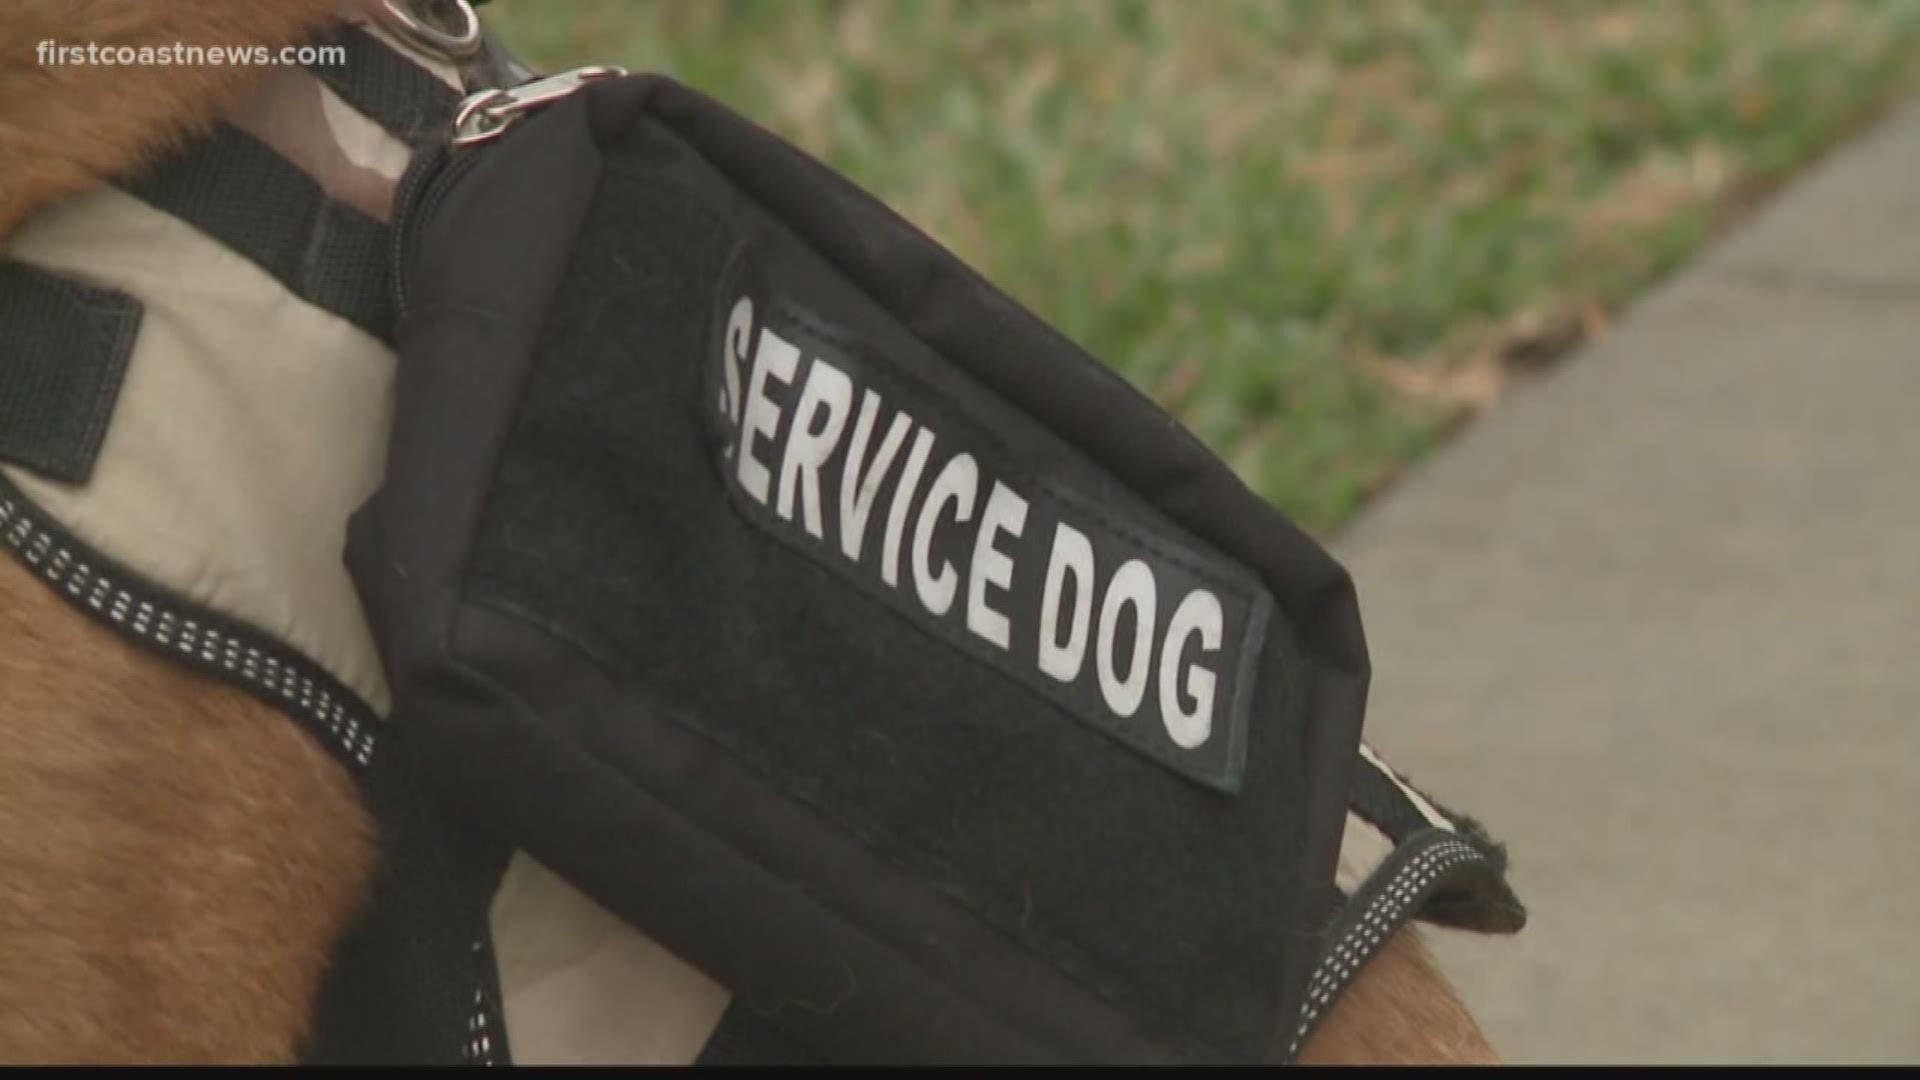 A Jacksonville veteran couldn't afford to keep his service dog, but still needs one as he copes with PTSD.